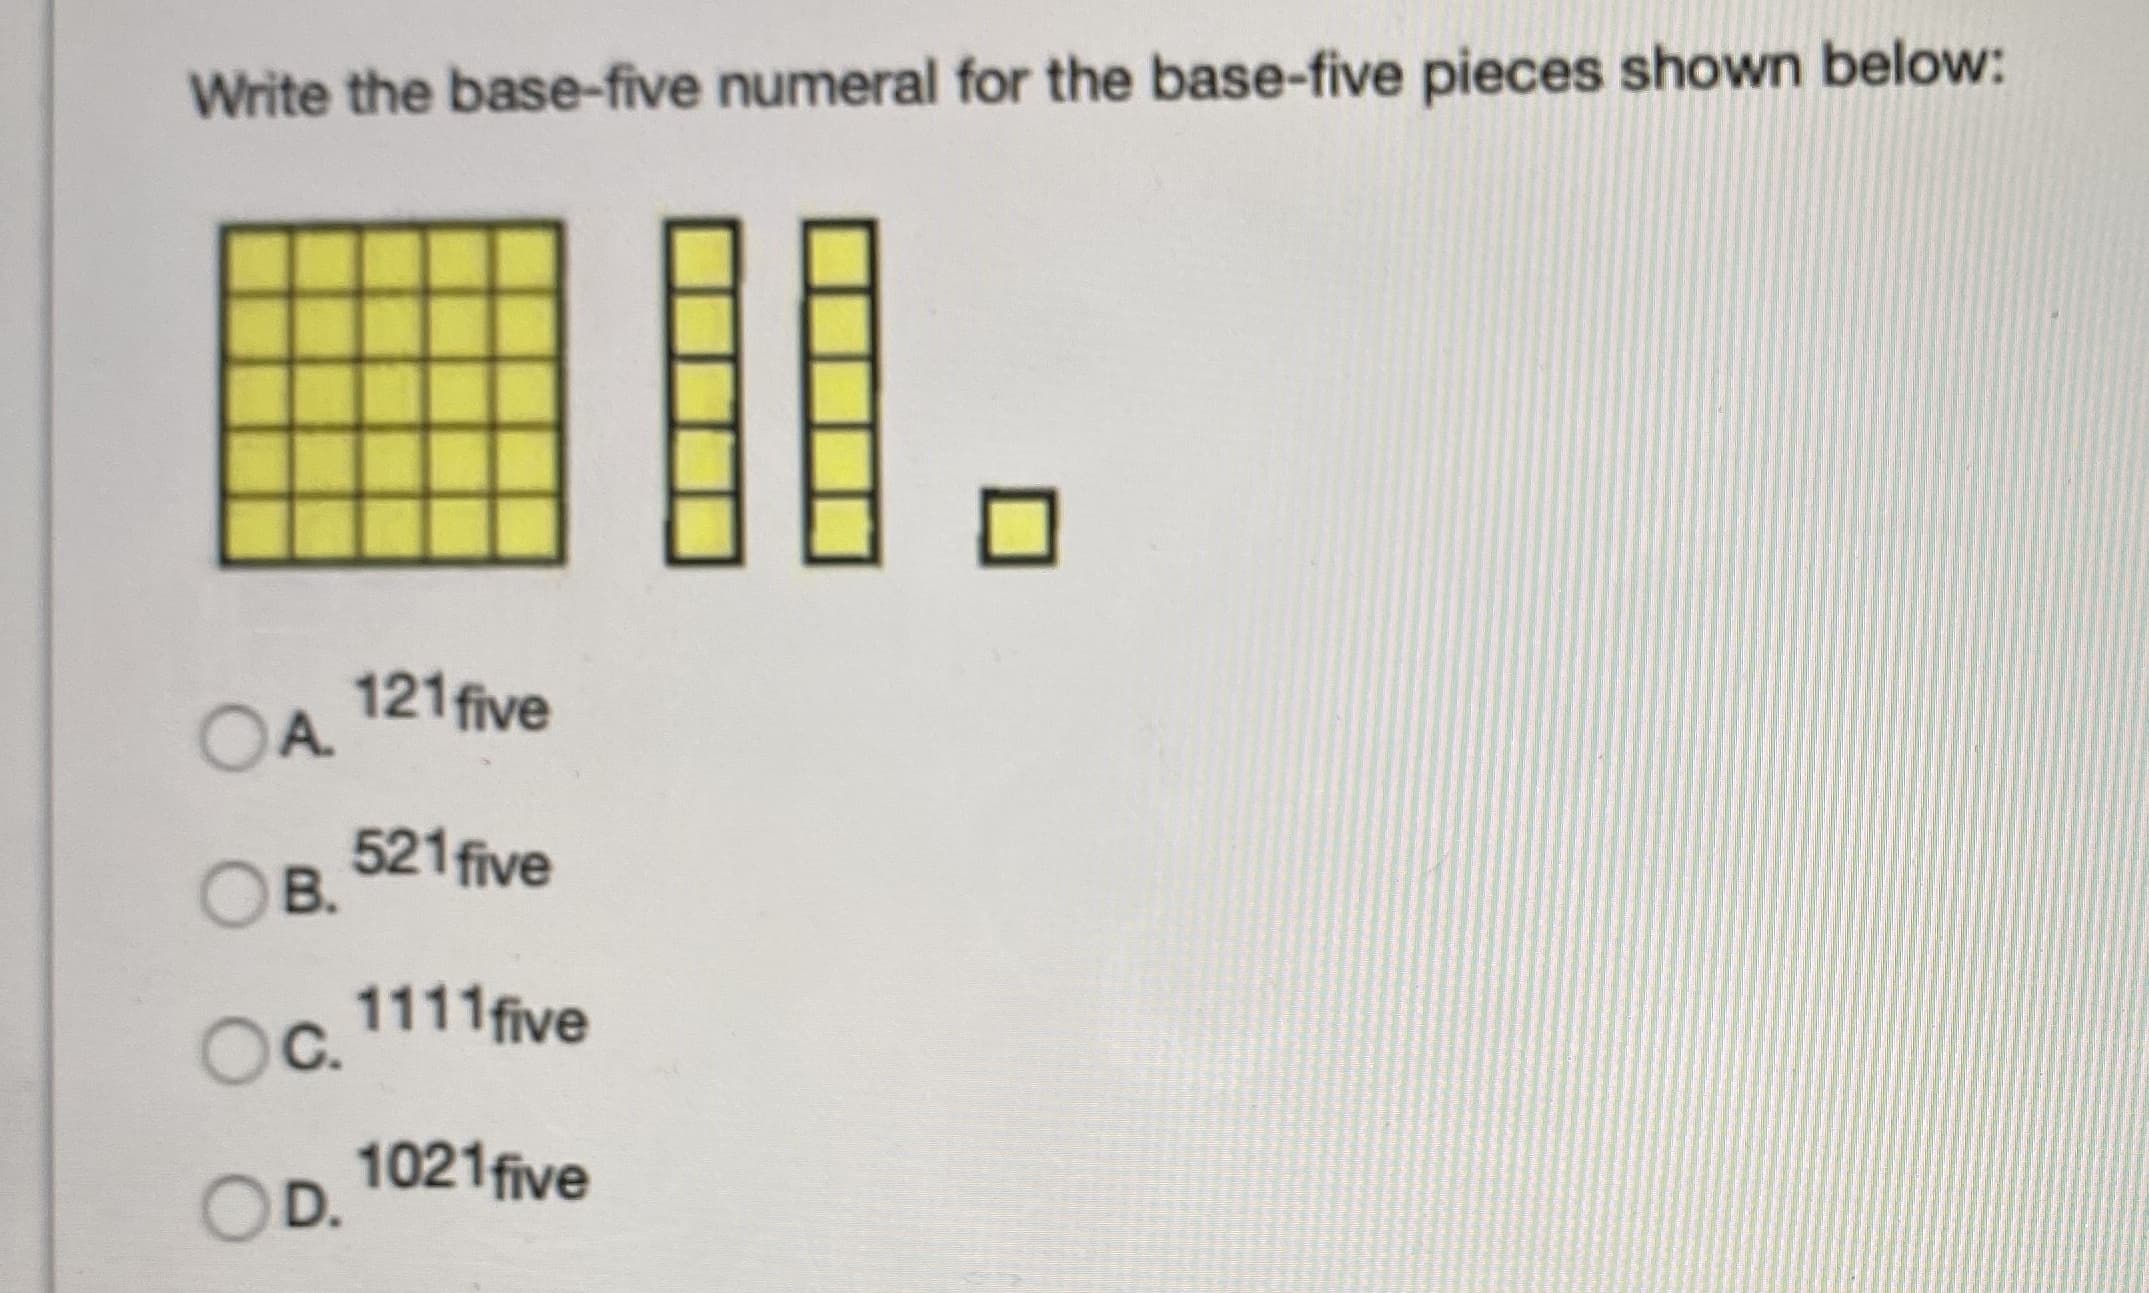 Write the base-five numeral for the base-five pieces shown below:
121 five
OA
521 five
B.
Oc.
Oc. 1111five
1021five
OD.
